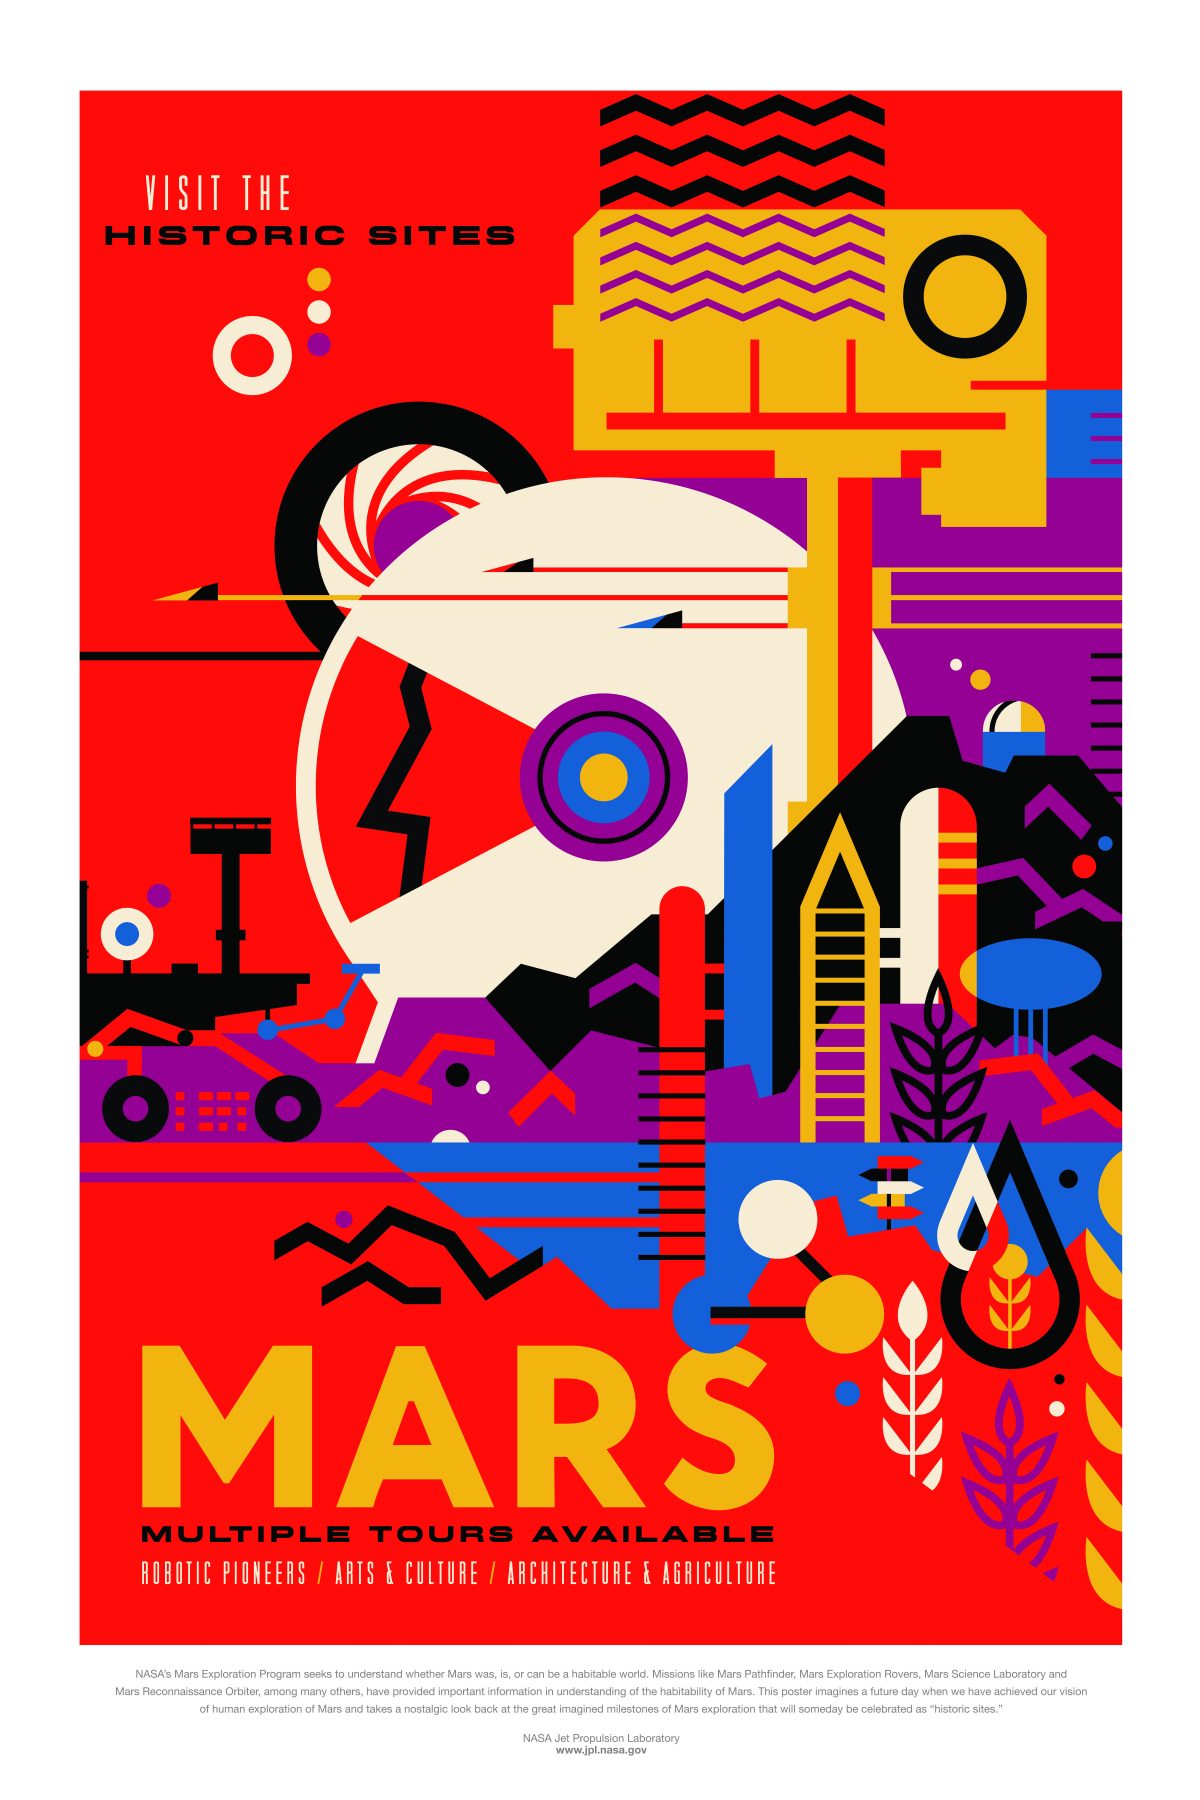 NASA's Mars Exploration Program seeks to understand whether Mars was, is, or can be a habitable world. Mission like Mars Pathfinder, Mars Exploration Rovers, Mars Science Laboratory and Mars Reconnaissance Orbiter, among many others, have provided important information in understanding of the habitability of Mars. This poster imagines a future day when we have achieved our vision of human exploration of Mars and takes a nostalgic look back at the great imagined milestones of Mars exploration that will someday be celebrated as “historic sites.”